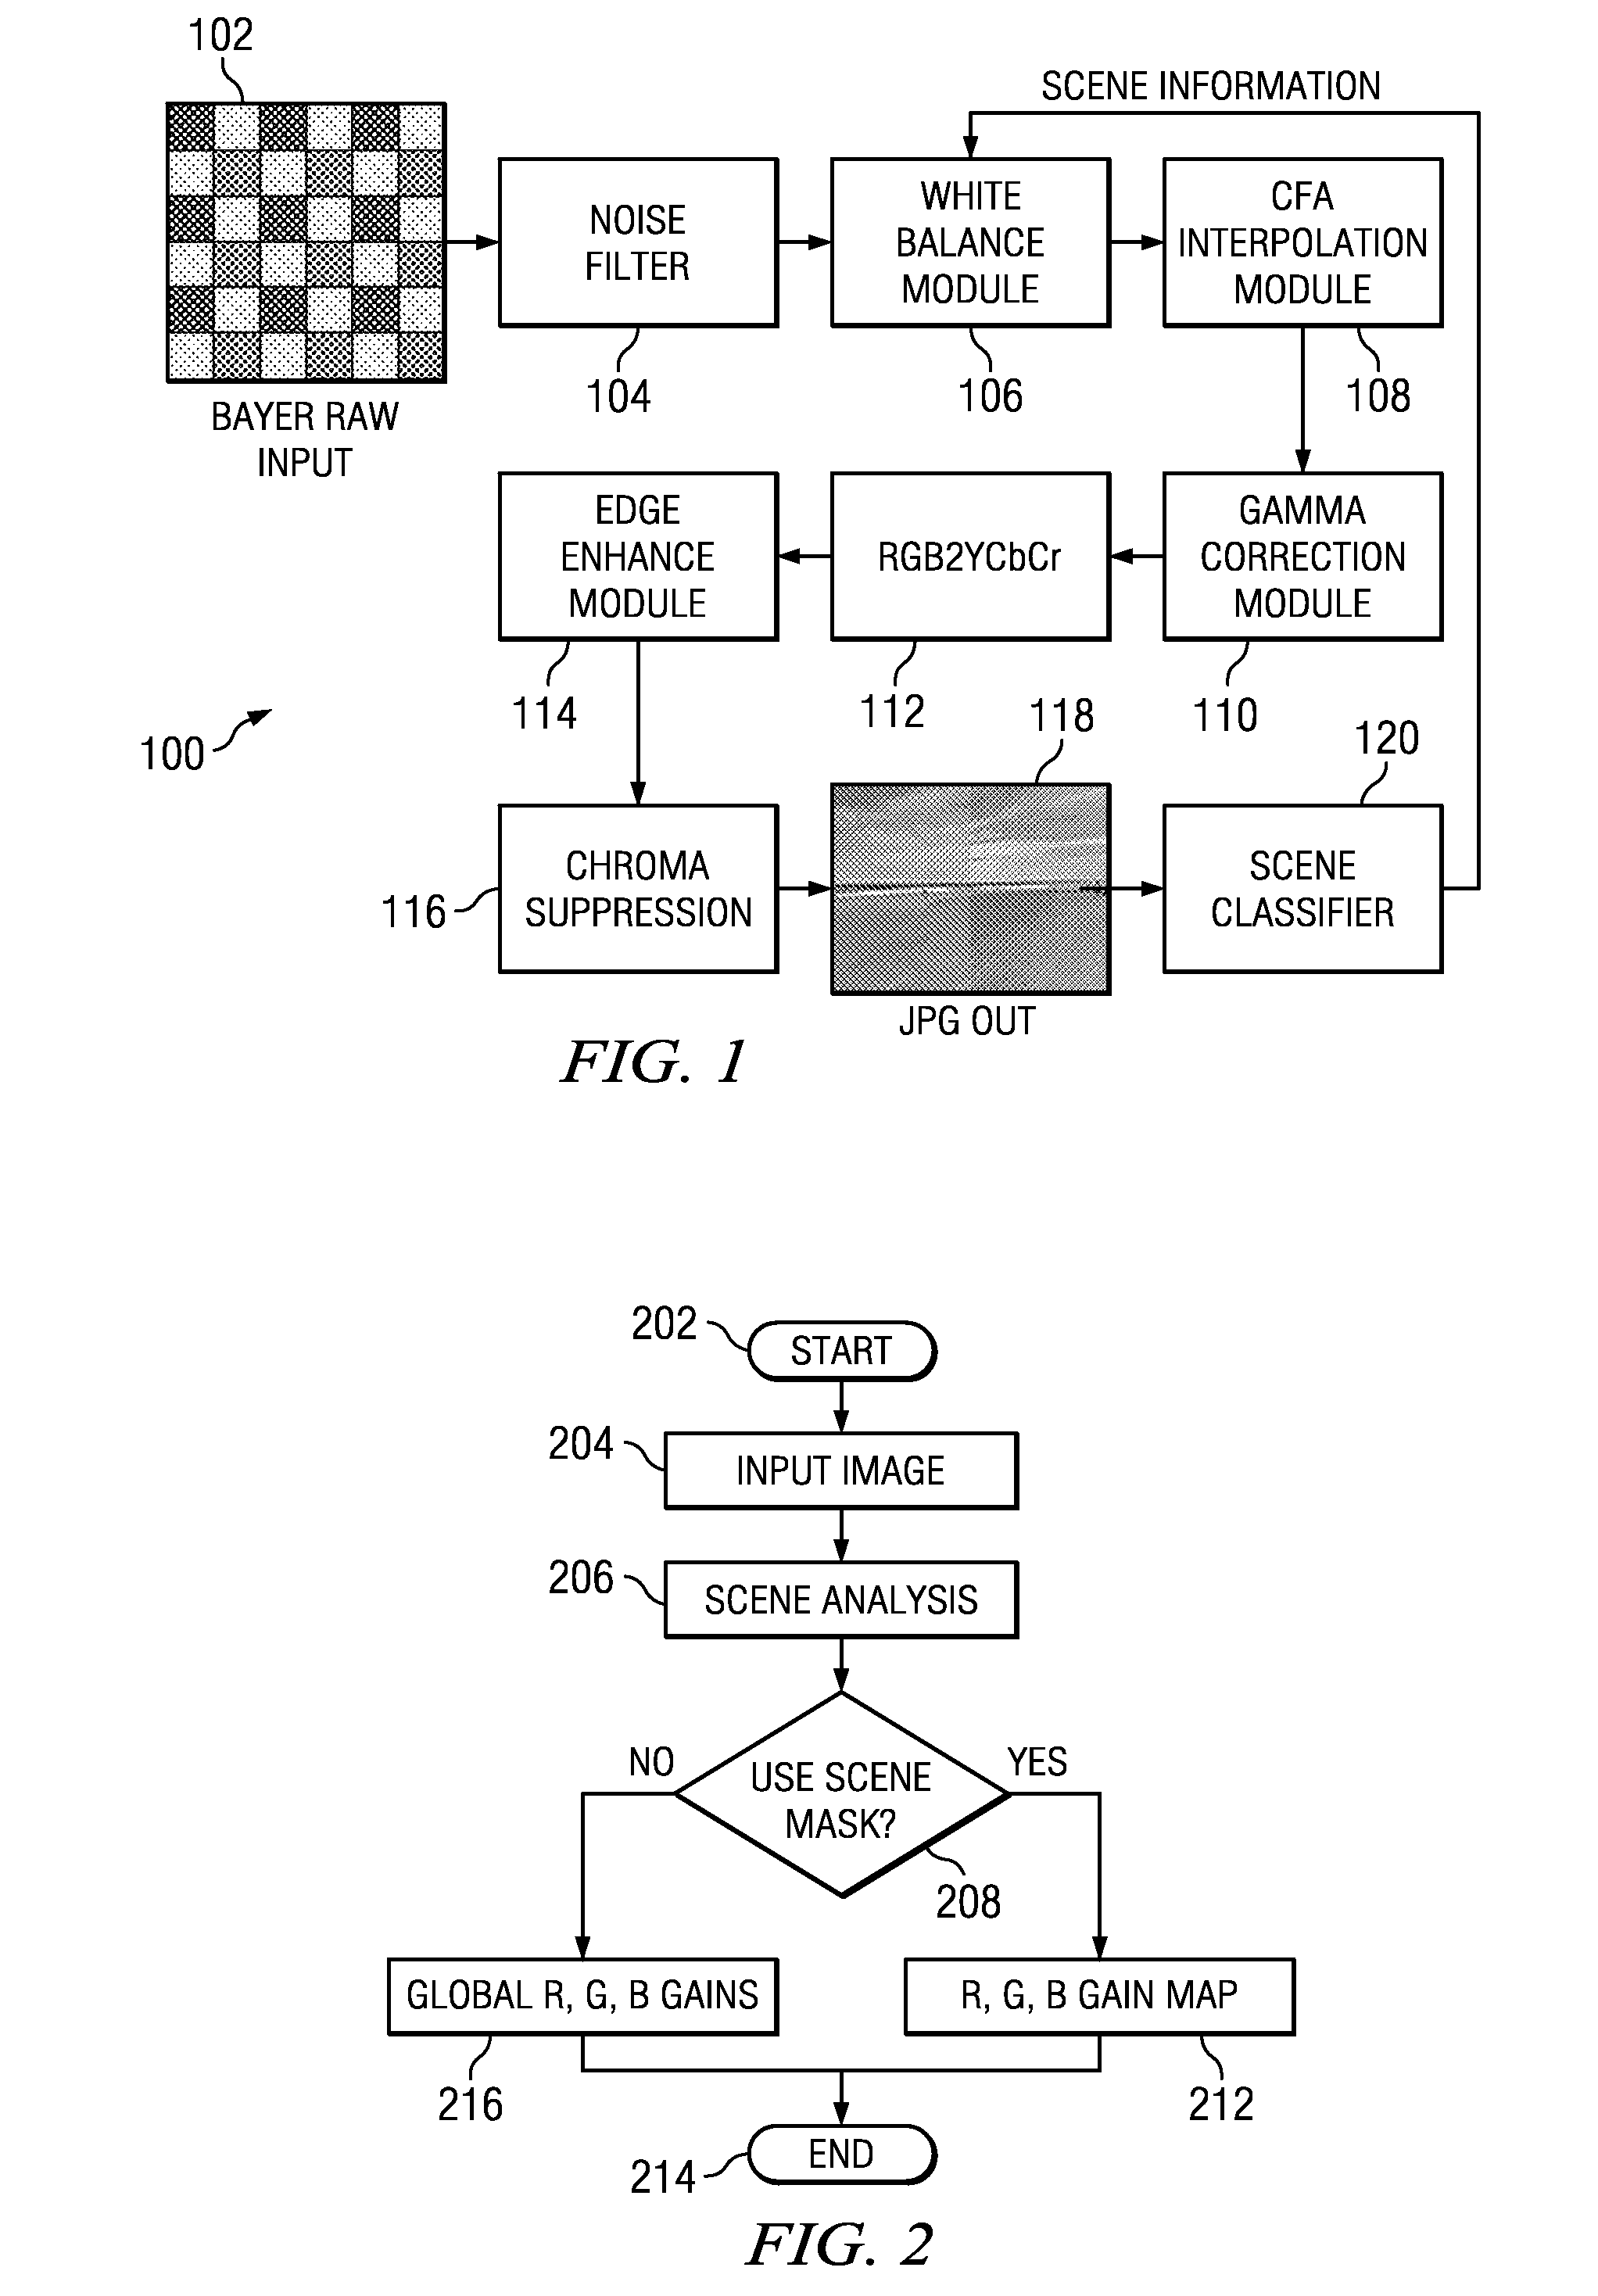 Method and apparatus for improving automatic white balance with scene information